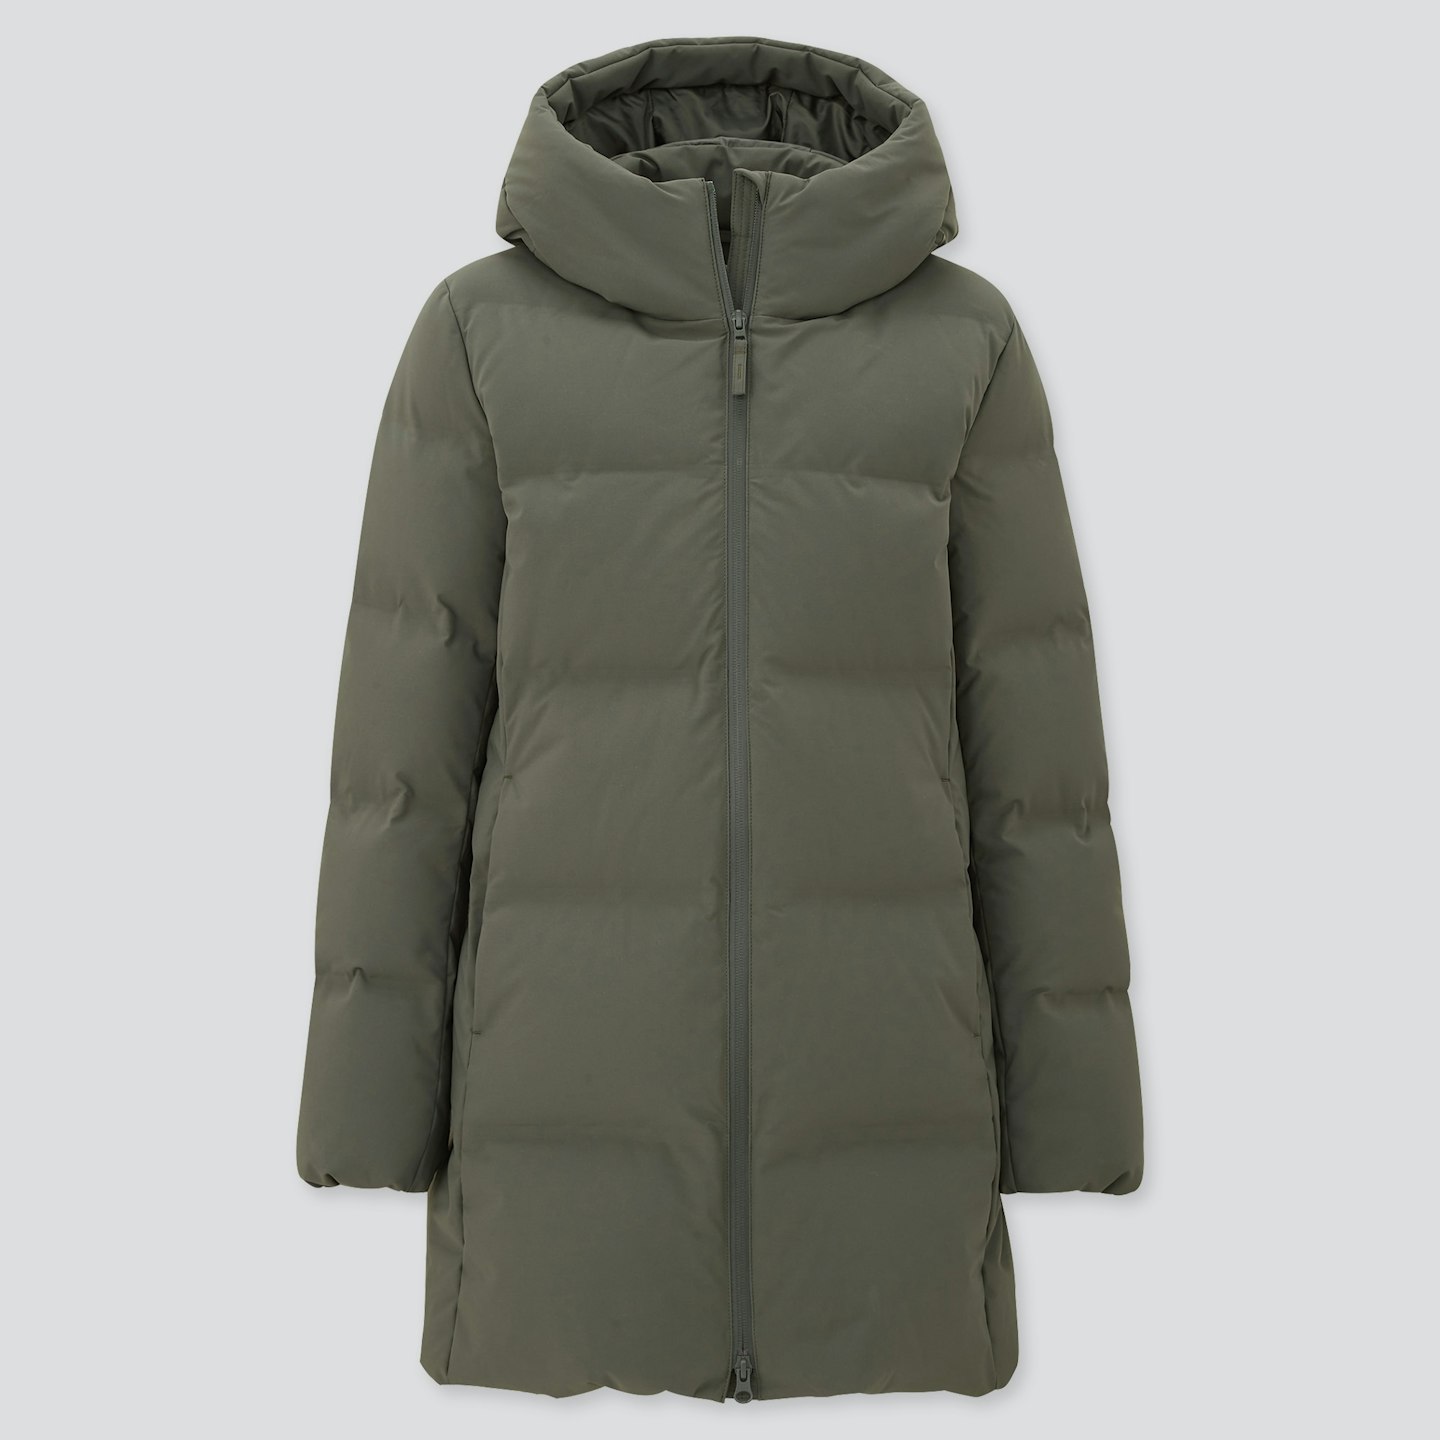 Uniqlo, Seamless Down Coat, WAS £129.90 NOW £99.90